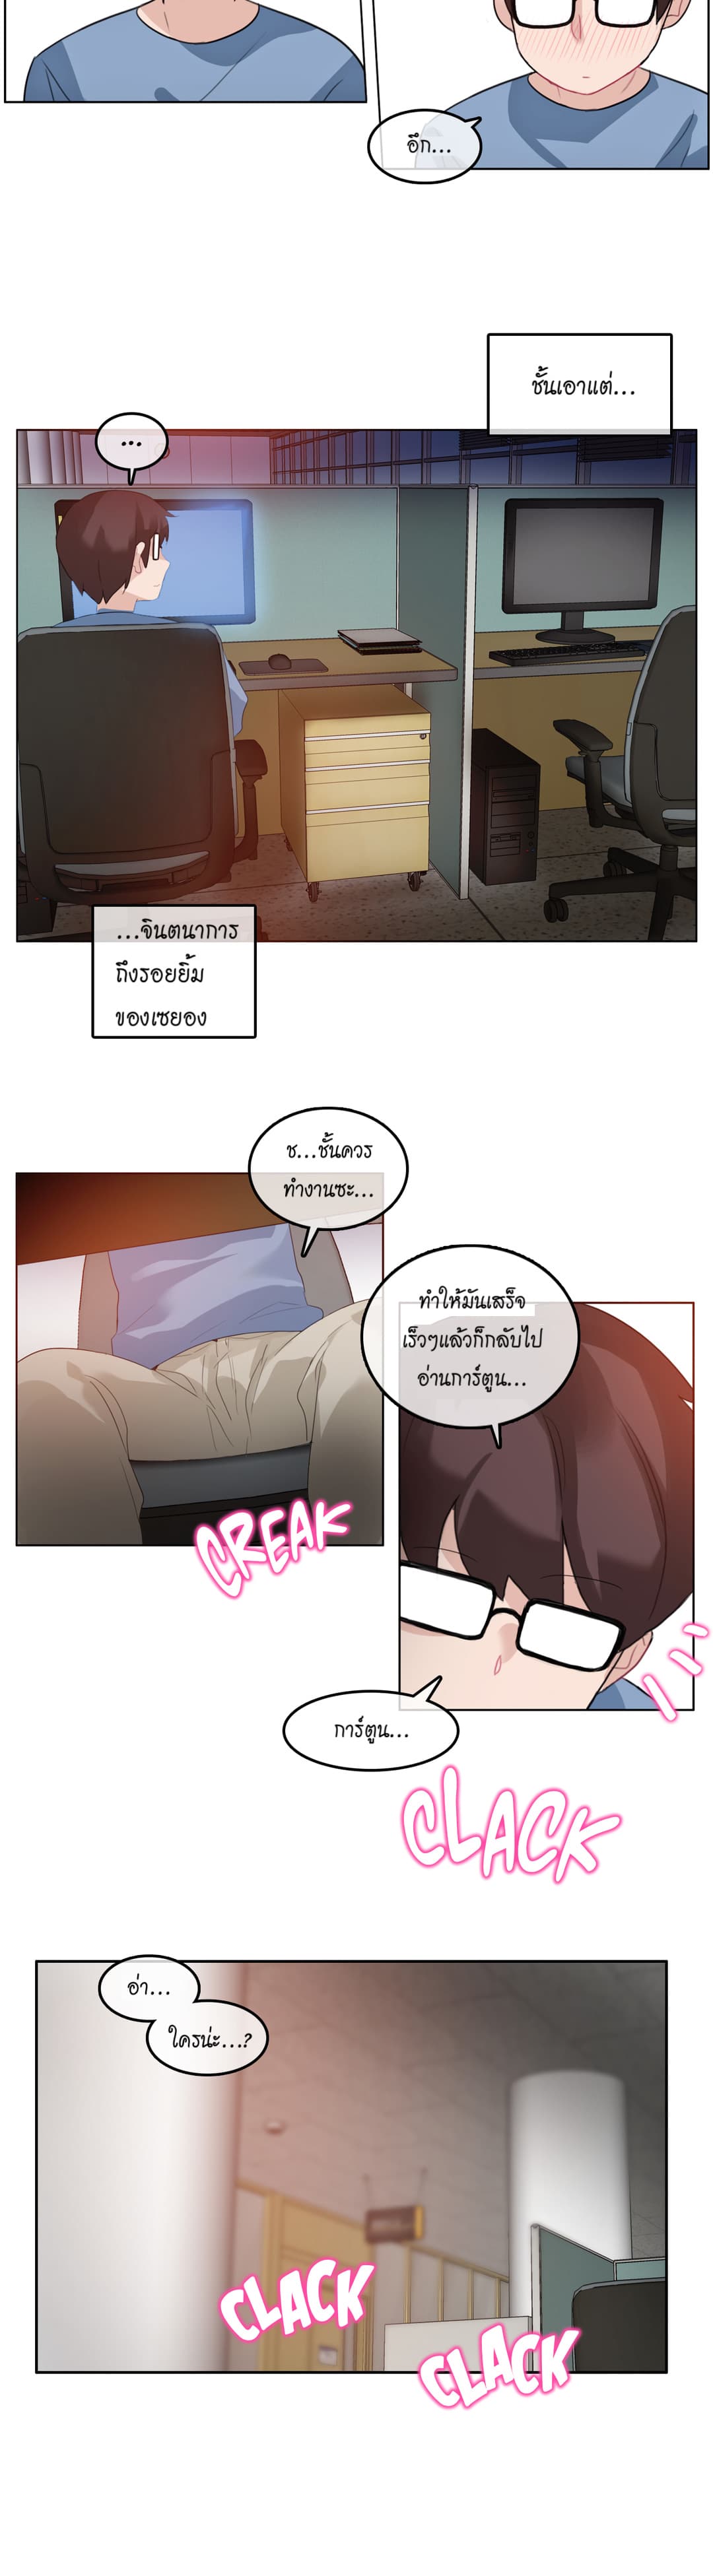 A Pervert’s Daily Life 23 (10)